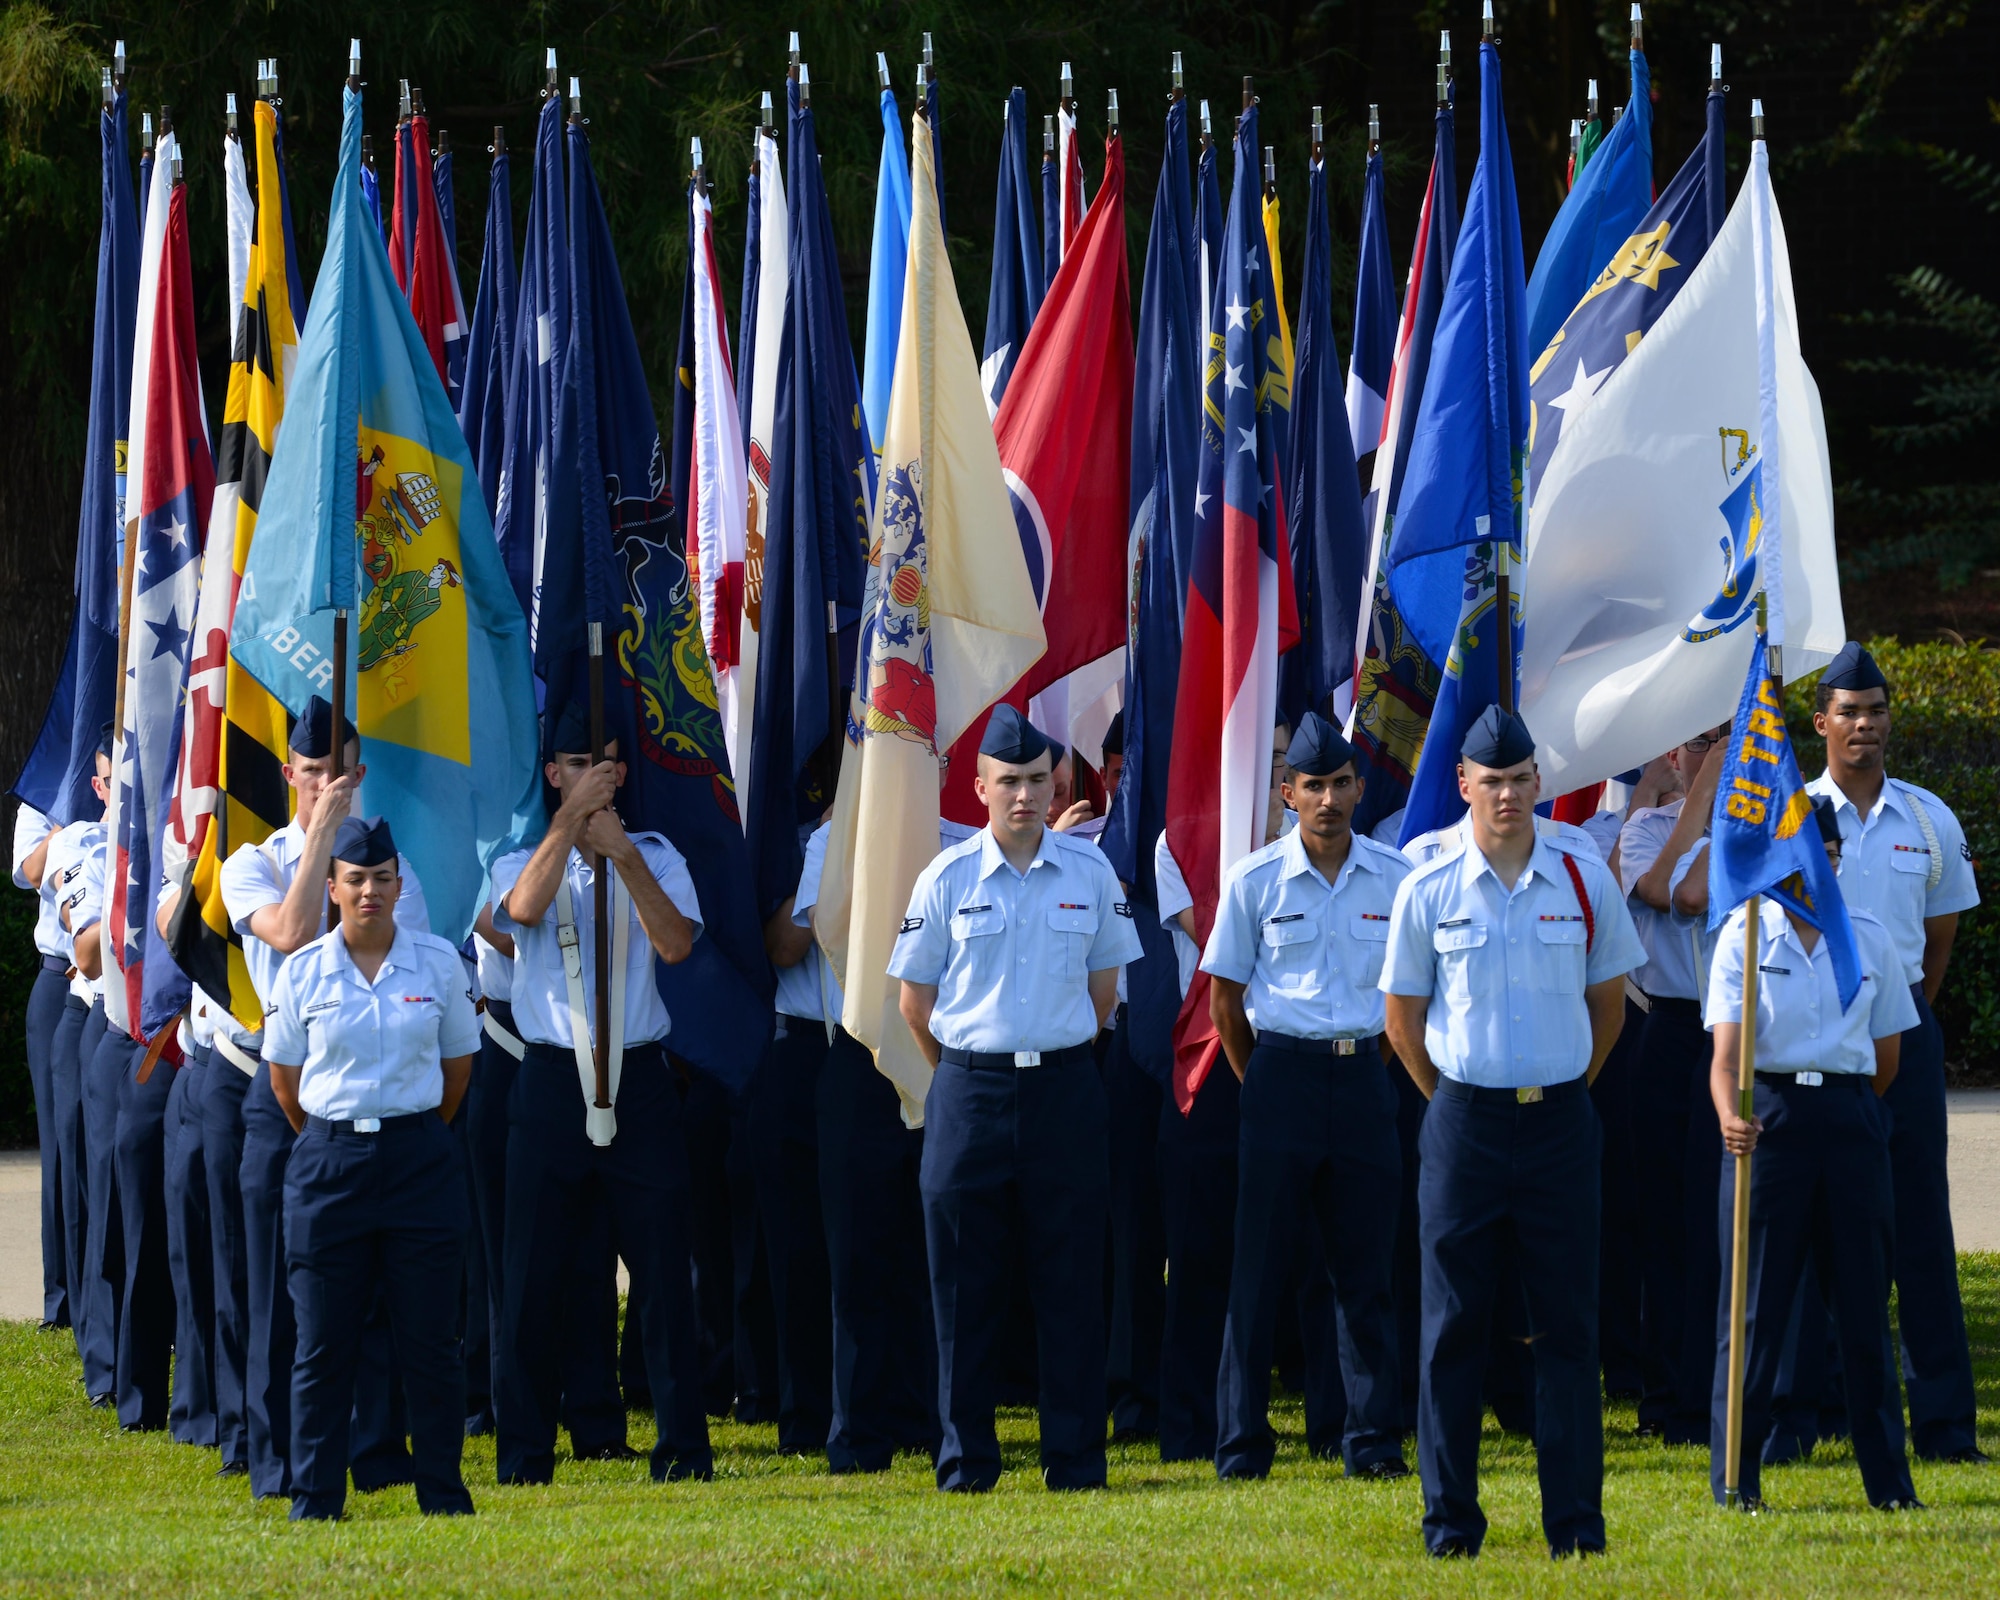 Airmen from the 81st Training Group stand in formation during the 2nd Air Force change of command ceremony at the Levitow Training Support Facility Aug. 23, 2017, on Keesler Air Force Base, Miss. Maj. Gen. Timothy Leahy took command of 2nd AF during the ceremony from Maj. Gen. Bob LaBrutta. (U.S. Air Force photo by Senior Airman Travis Beihl)